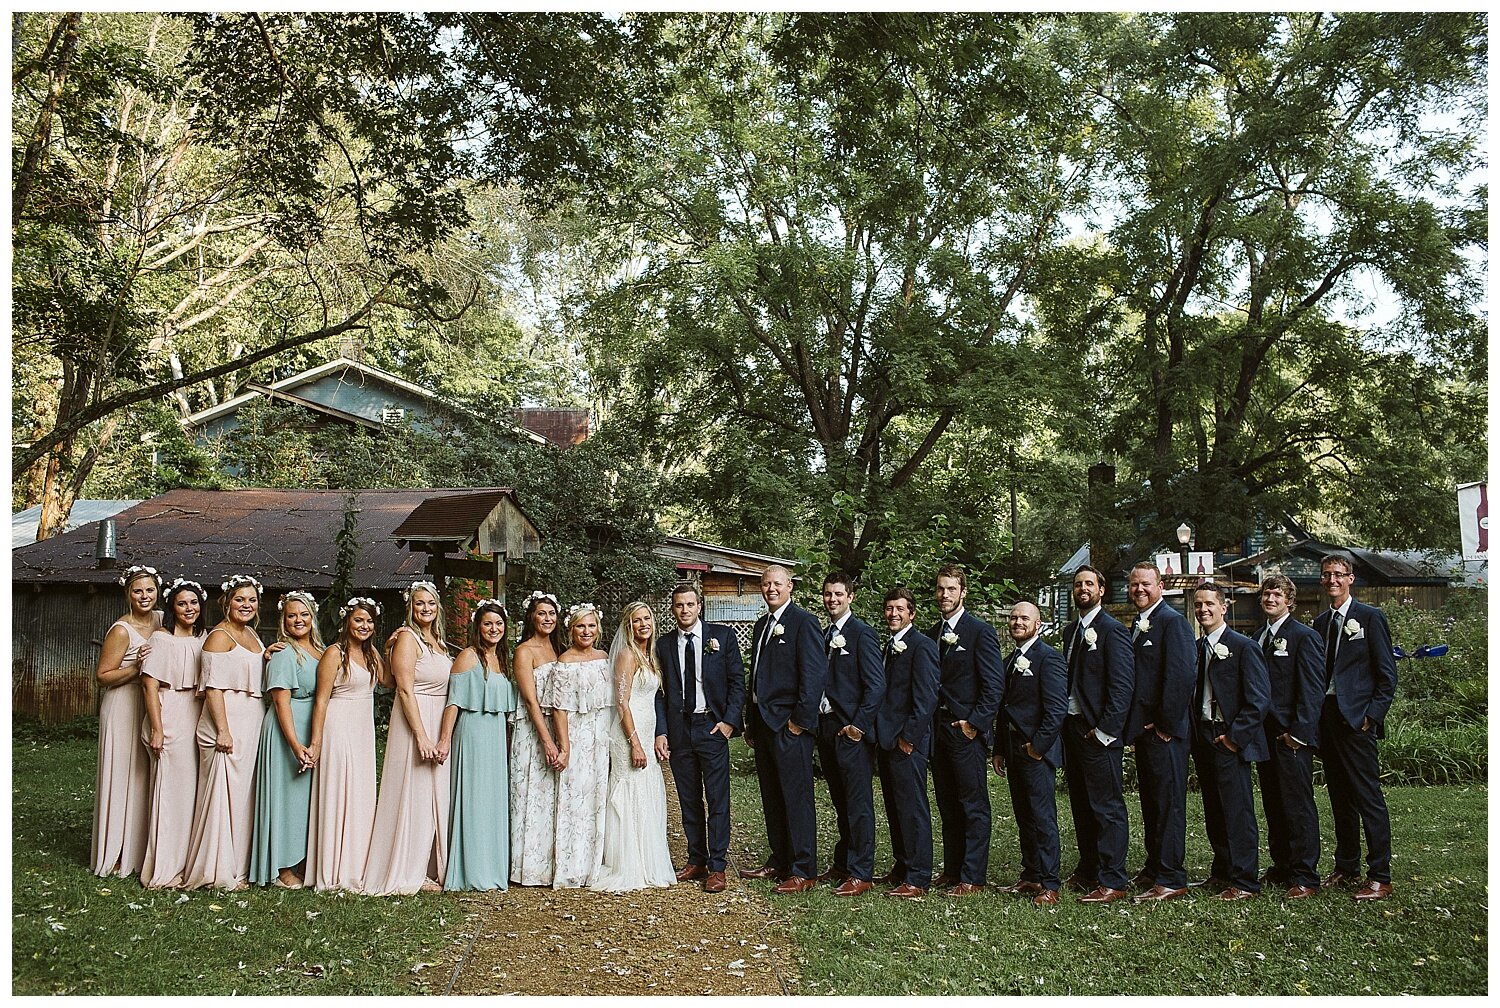 pastel colored bridal party outfits